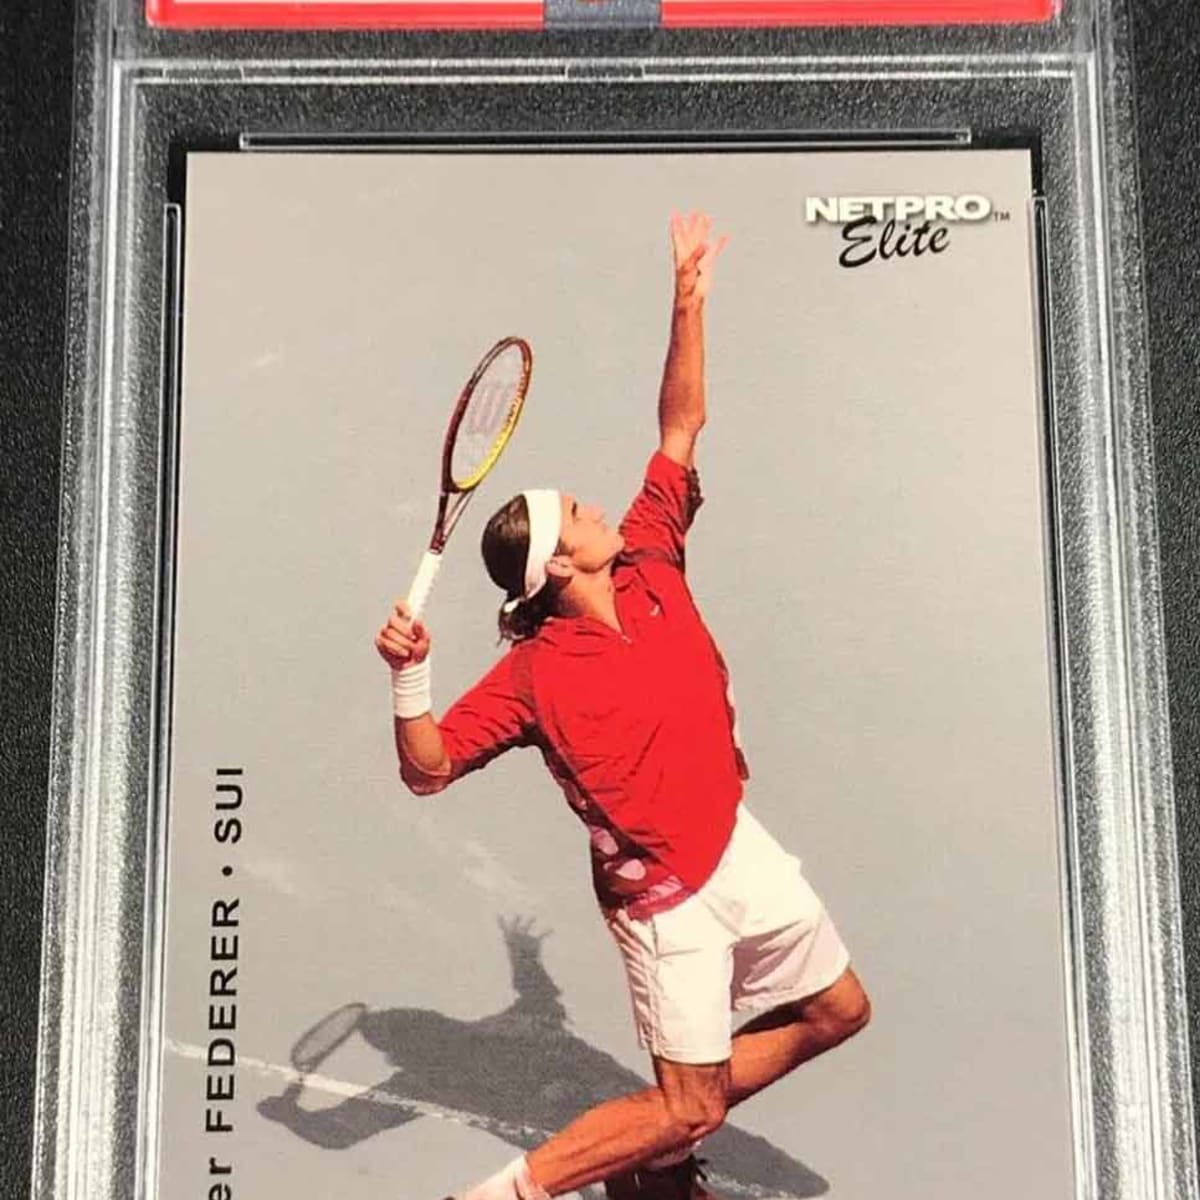 eBay sees big spike in Roger Federer cards, collectibles since